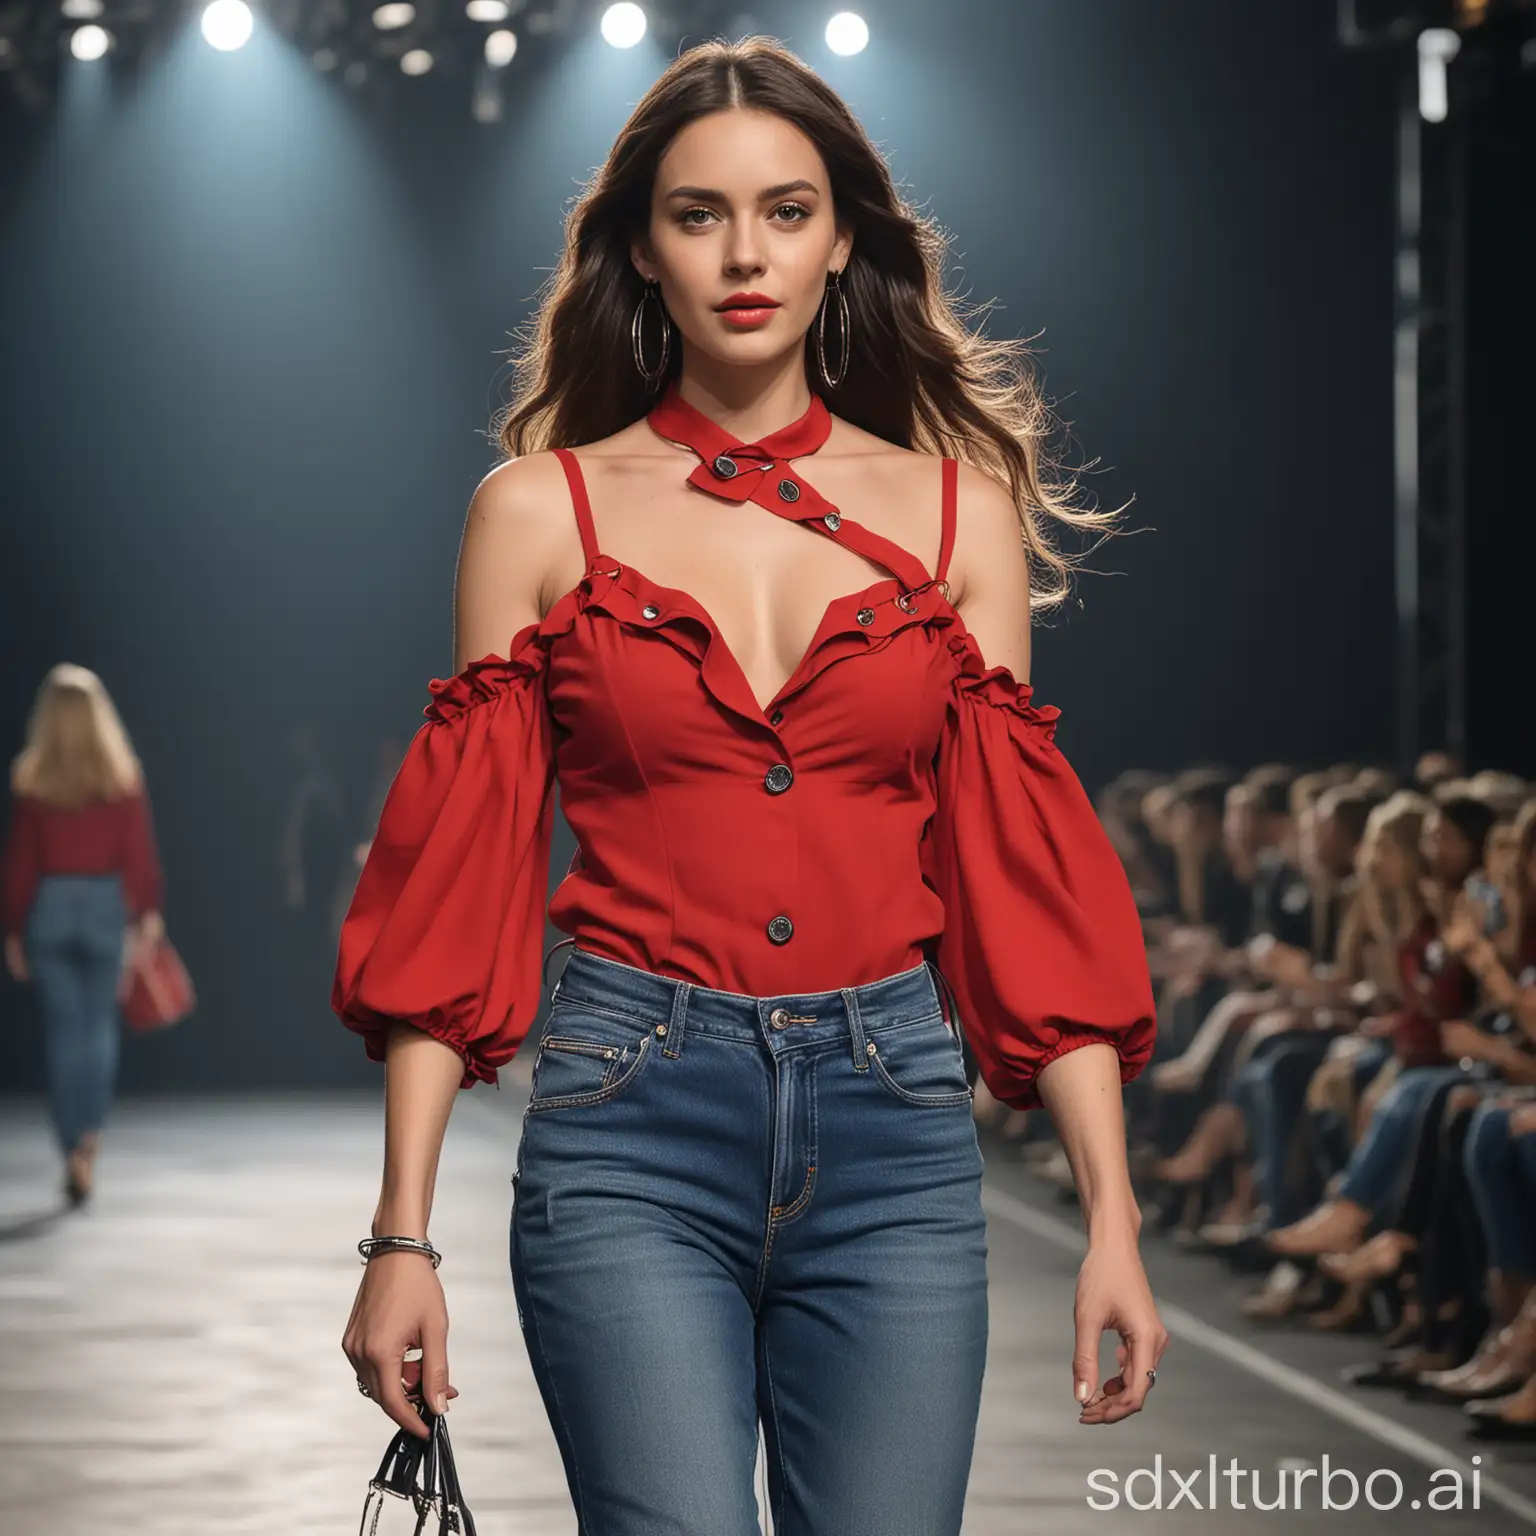 Fashion-Model-on-Runway-in-Red-Blouse-and-Blue-Jeans